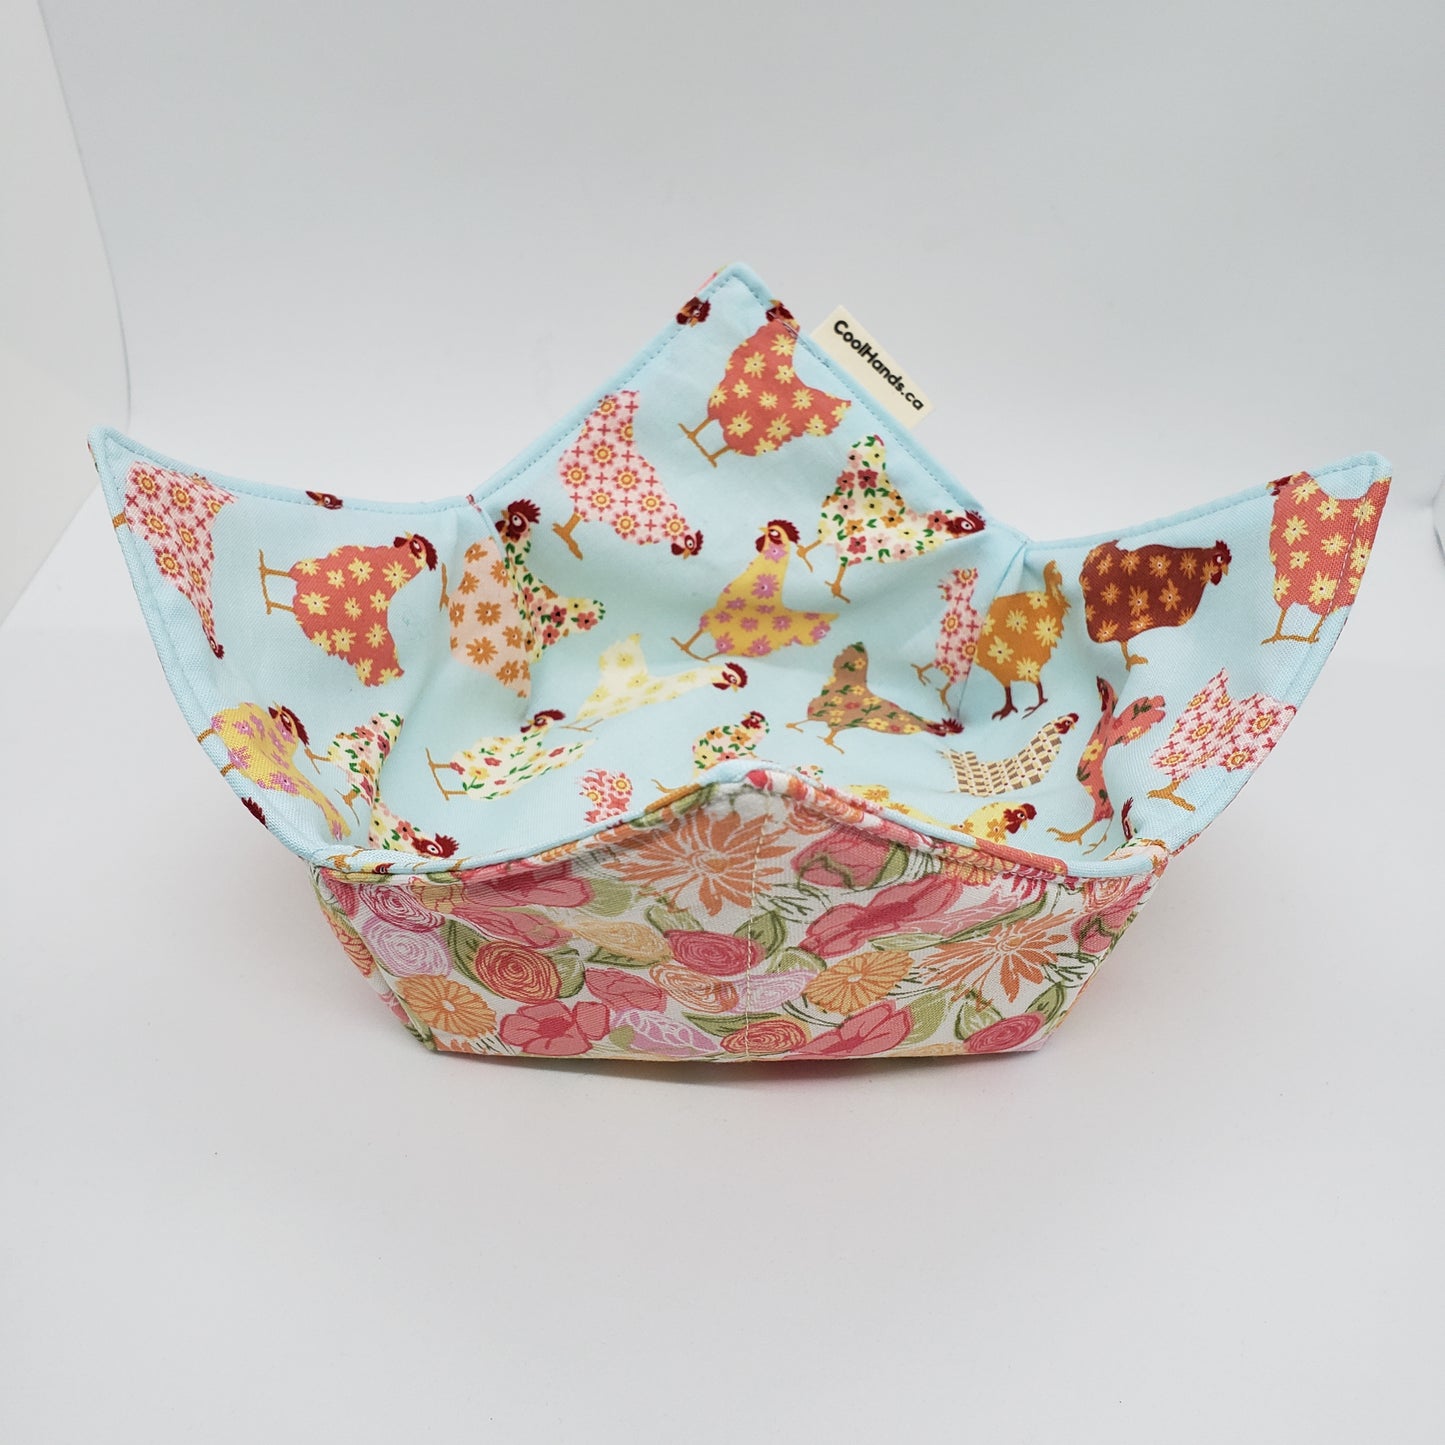 100% Cotton Microwavable Bowl Cozy - Spring Chicken